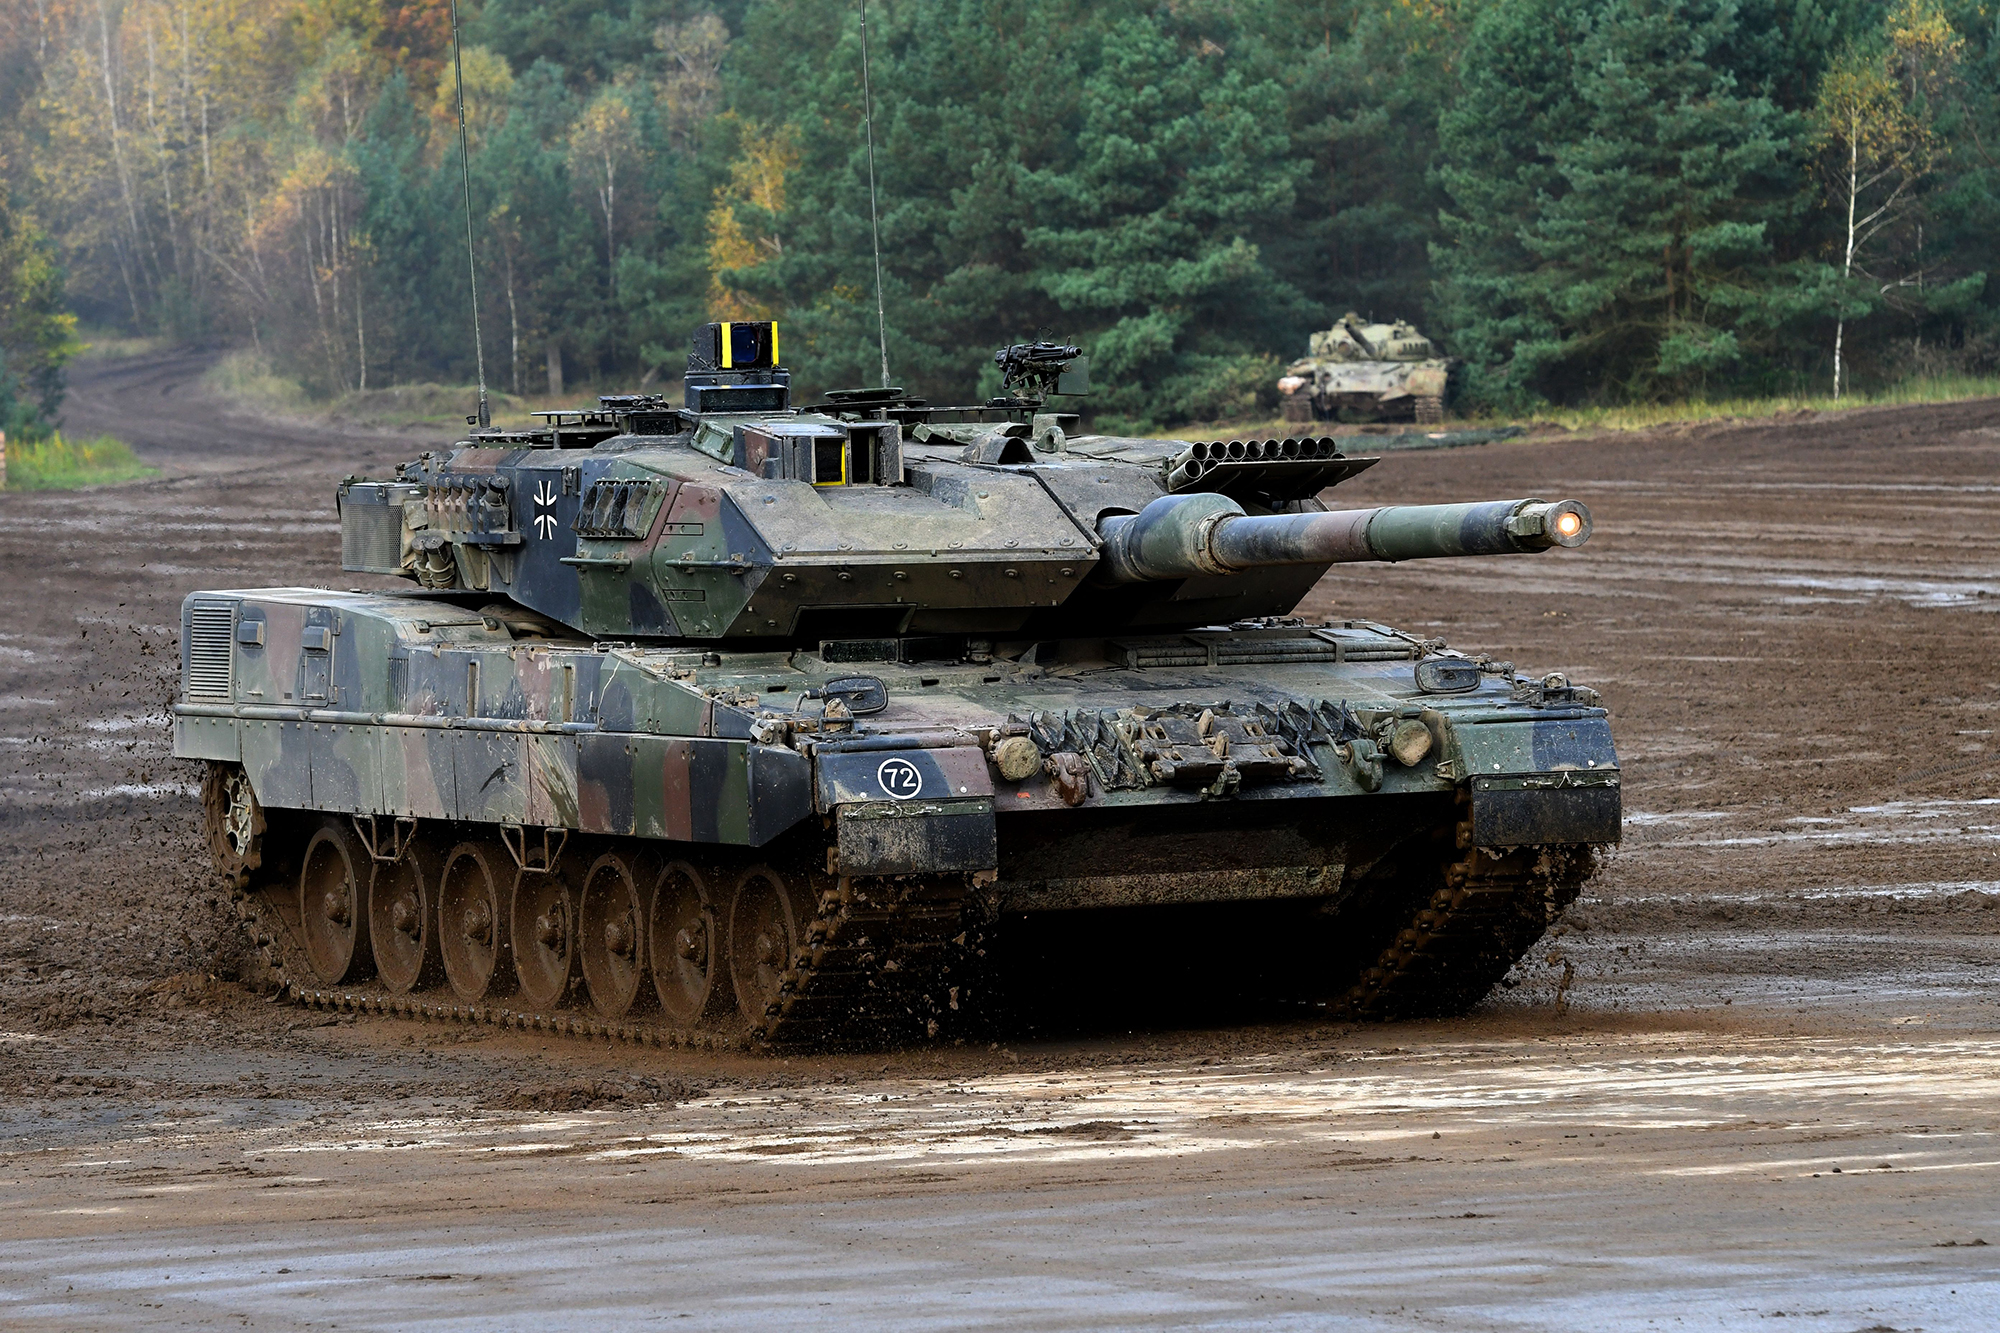 A Leopard 2 A7 tank of the German armed forces drives at the military training area in Munster, northern Germany, on October 13, 2017.